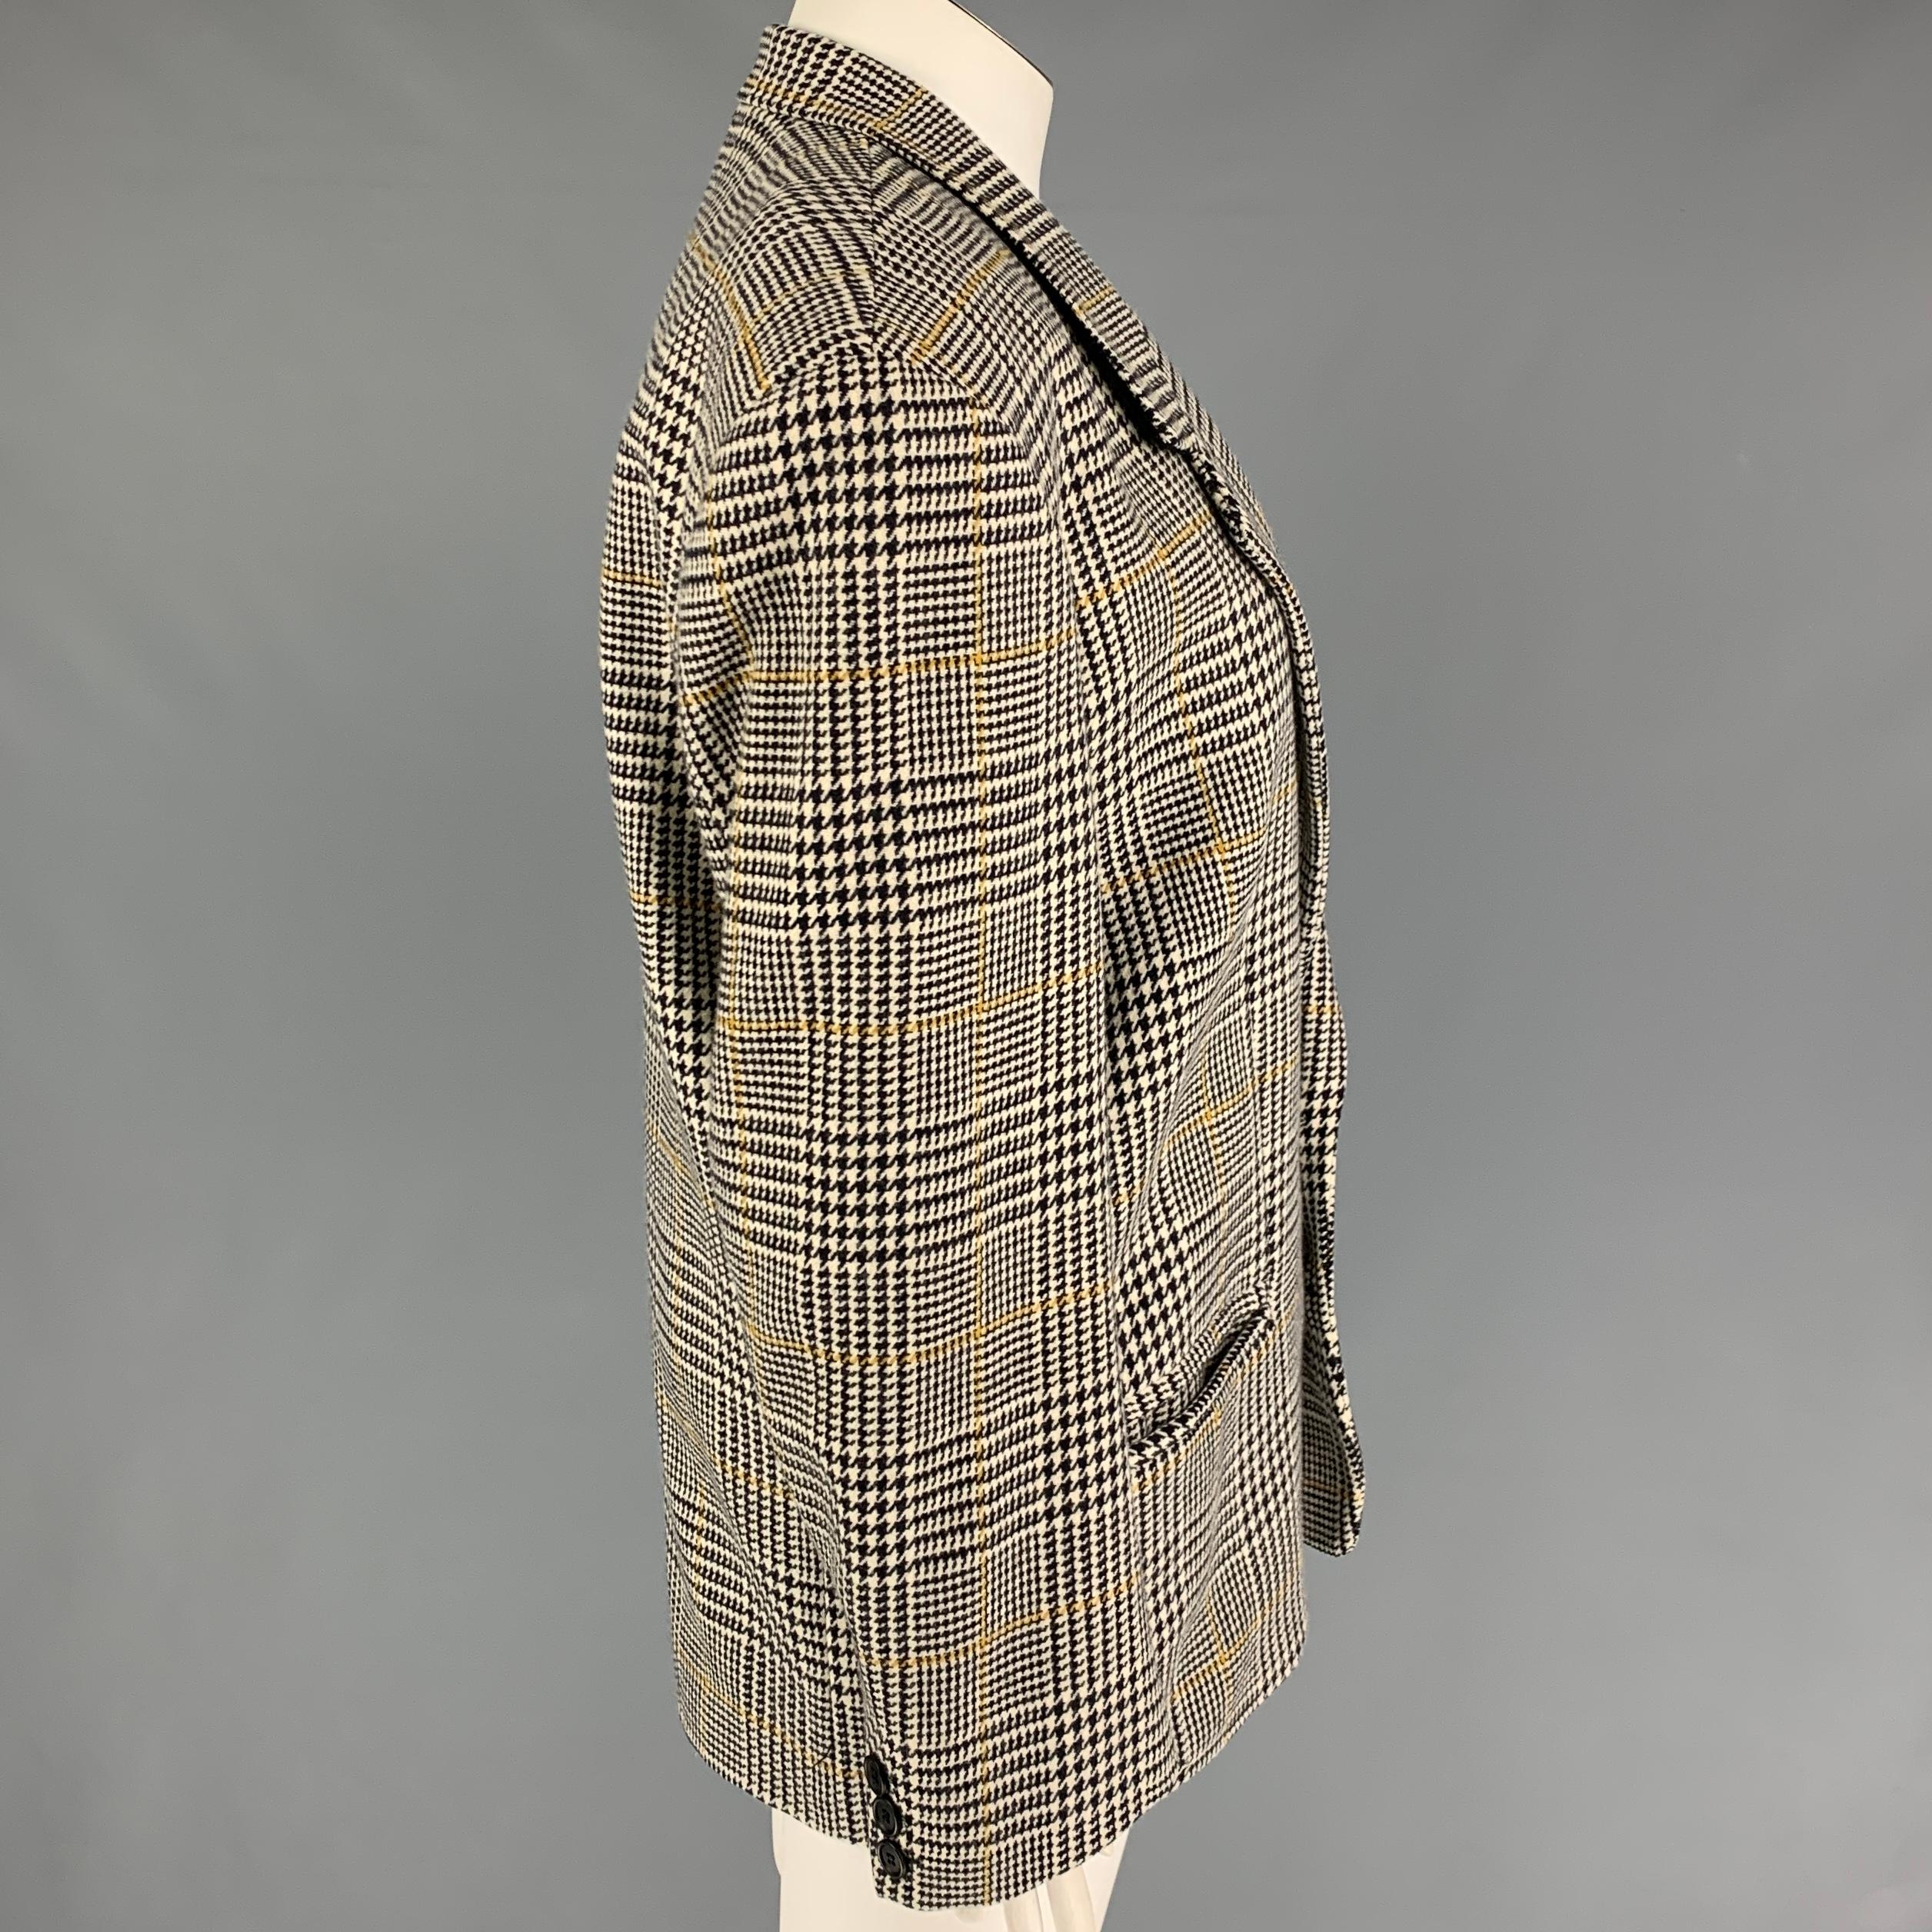 BYBLOS blazer comes in a black & white houndstooth viscose with a full liner featuring a notch lapel, slit pockets, and a double button closure. Made in Italy. 

Very Good Pre-Owned Condition.
Marked: I 50 / F 48 / D 44 / GB 42 / BS 46 / USA